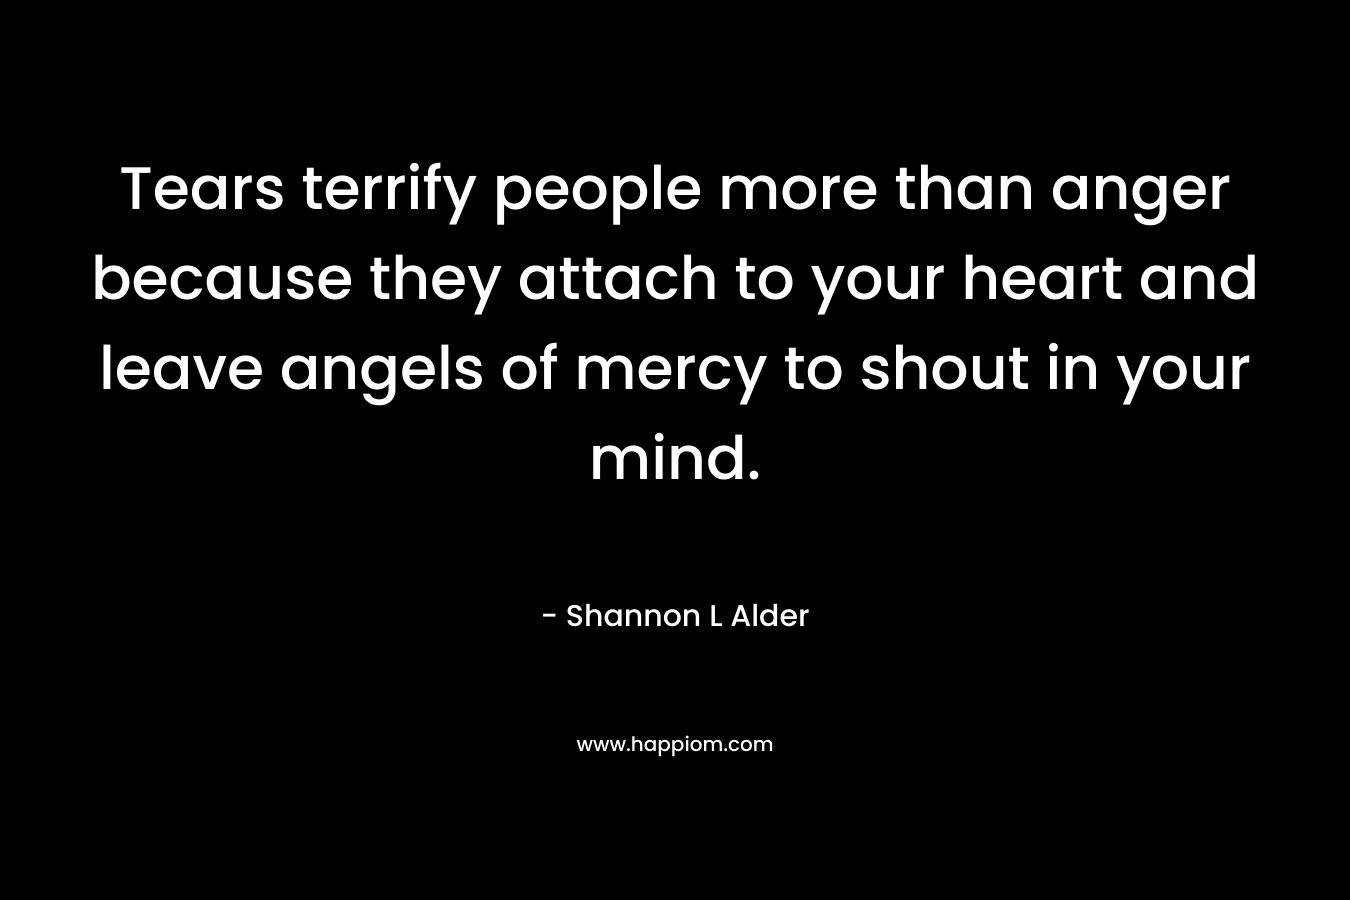 Tears terrify people more than anger because they attach to your heart and leave angels of mercy to shout in your mind.